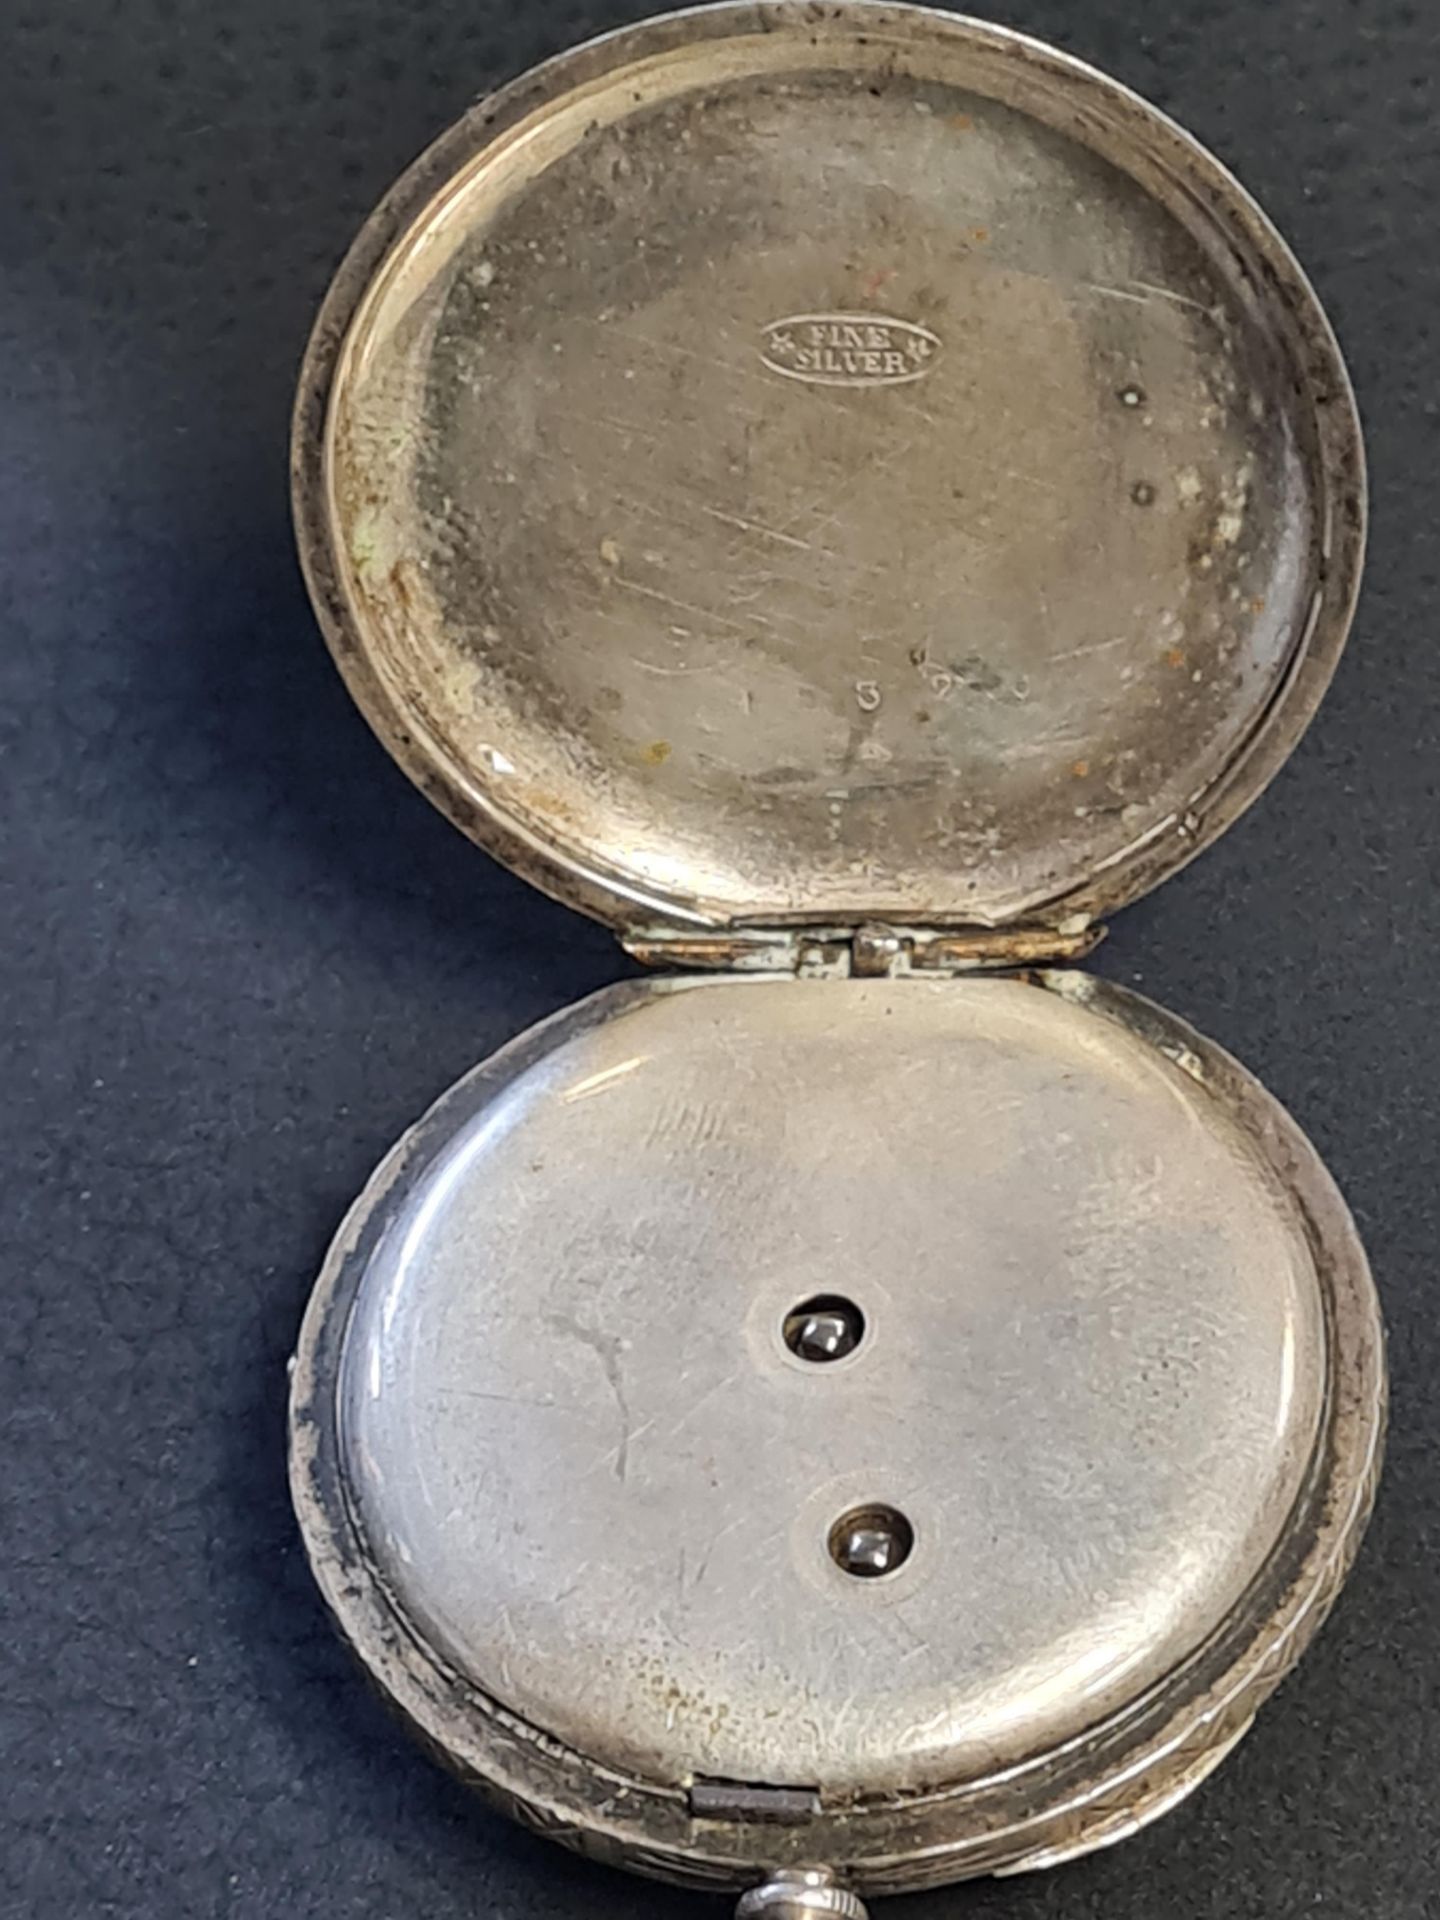 Gents silver stamped cased pocket watch 1895 - Image 2 of 2